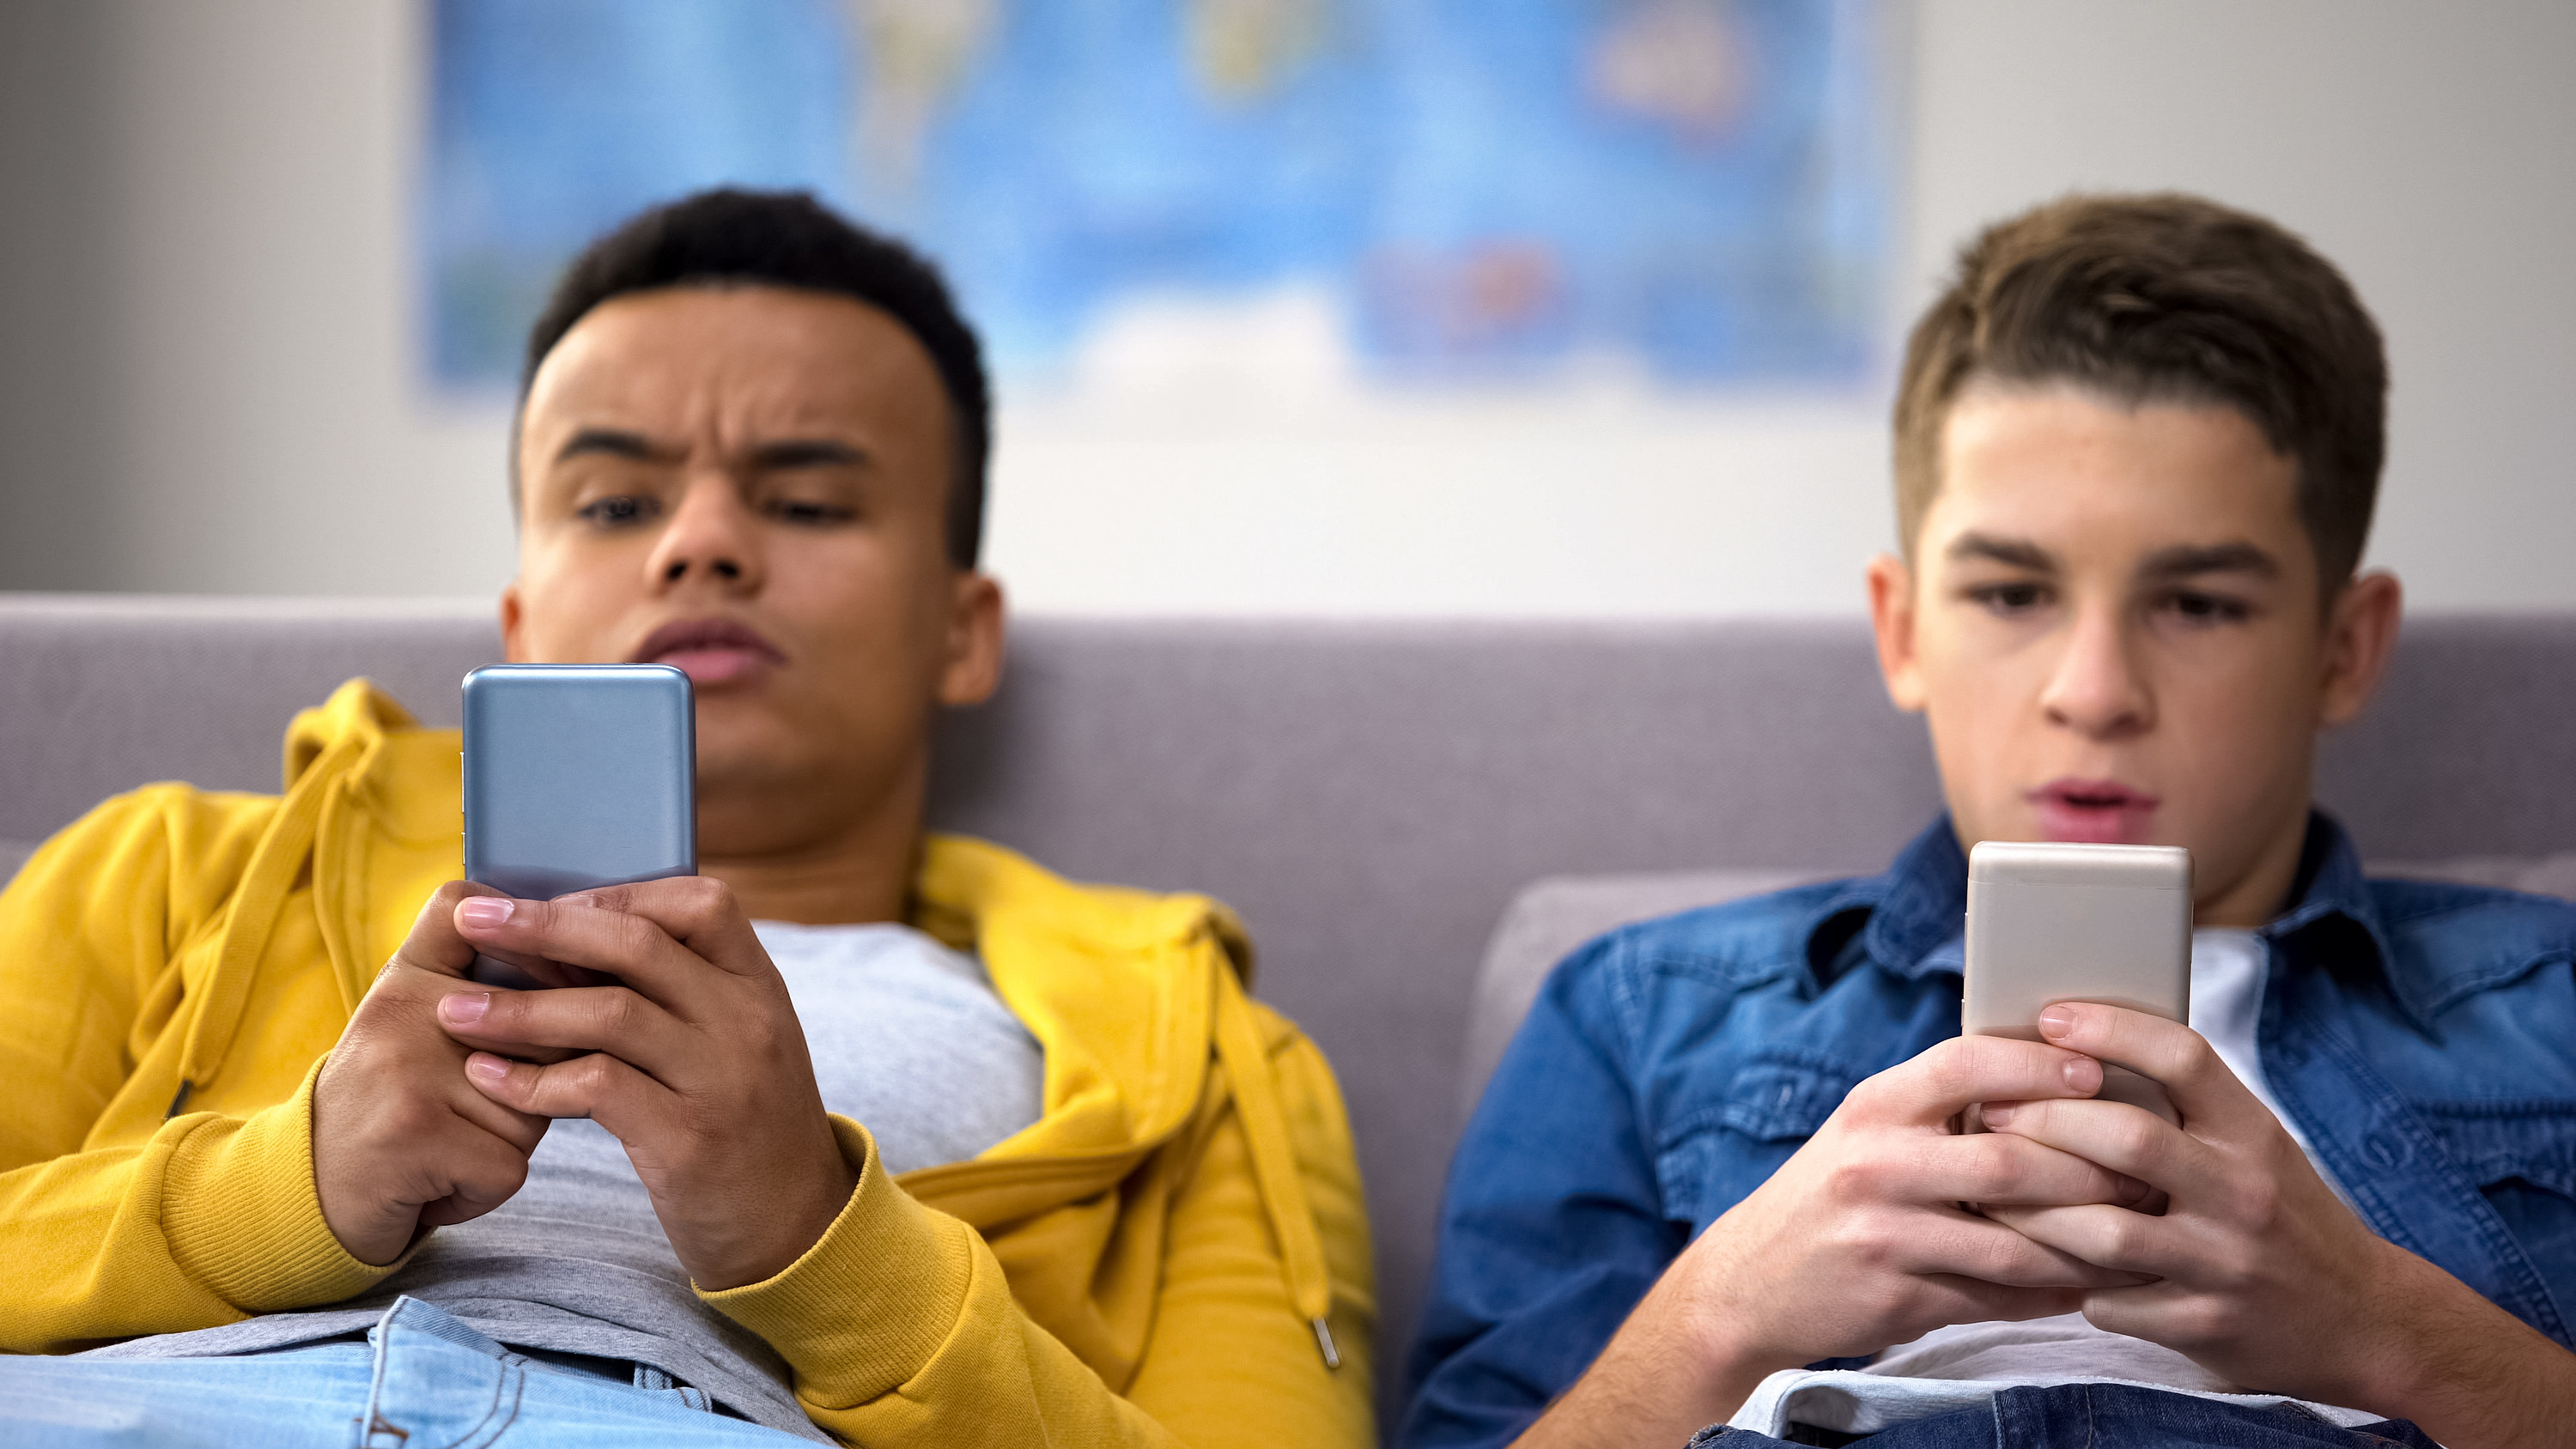 A stock image showing two young boys sitting on a grey couch on their phones